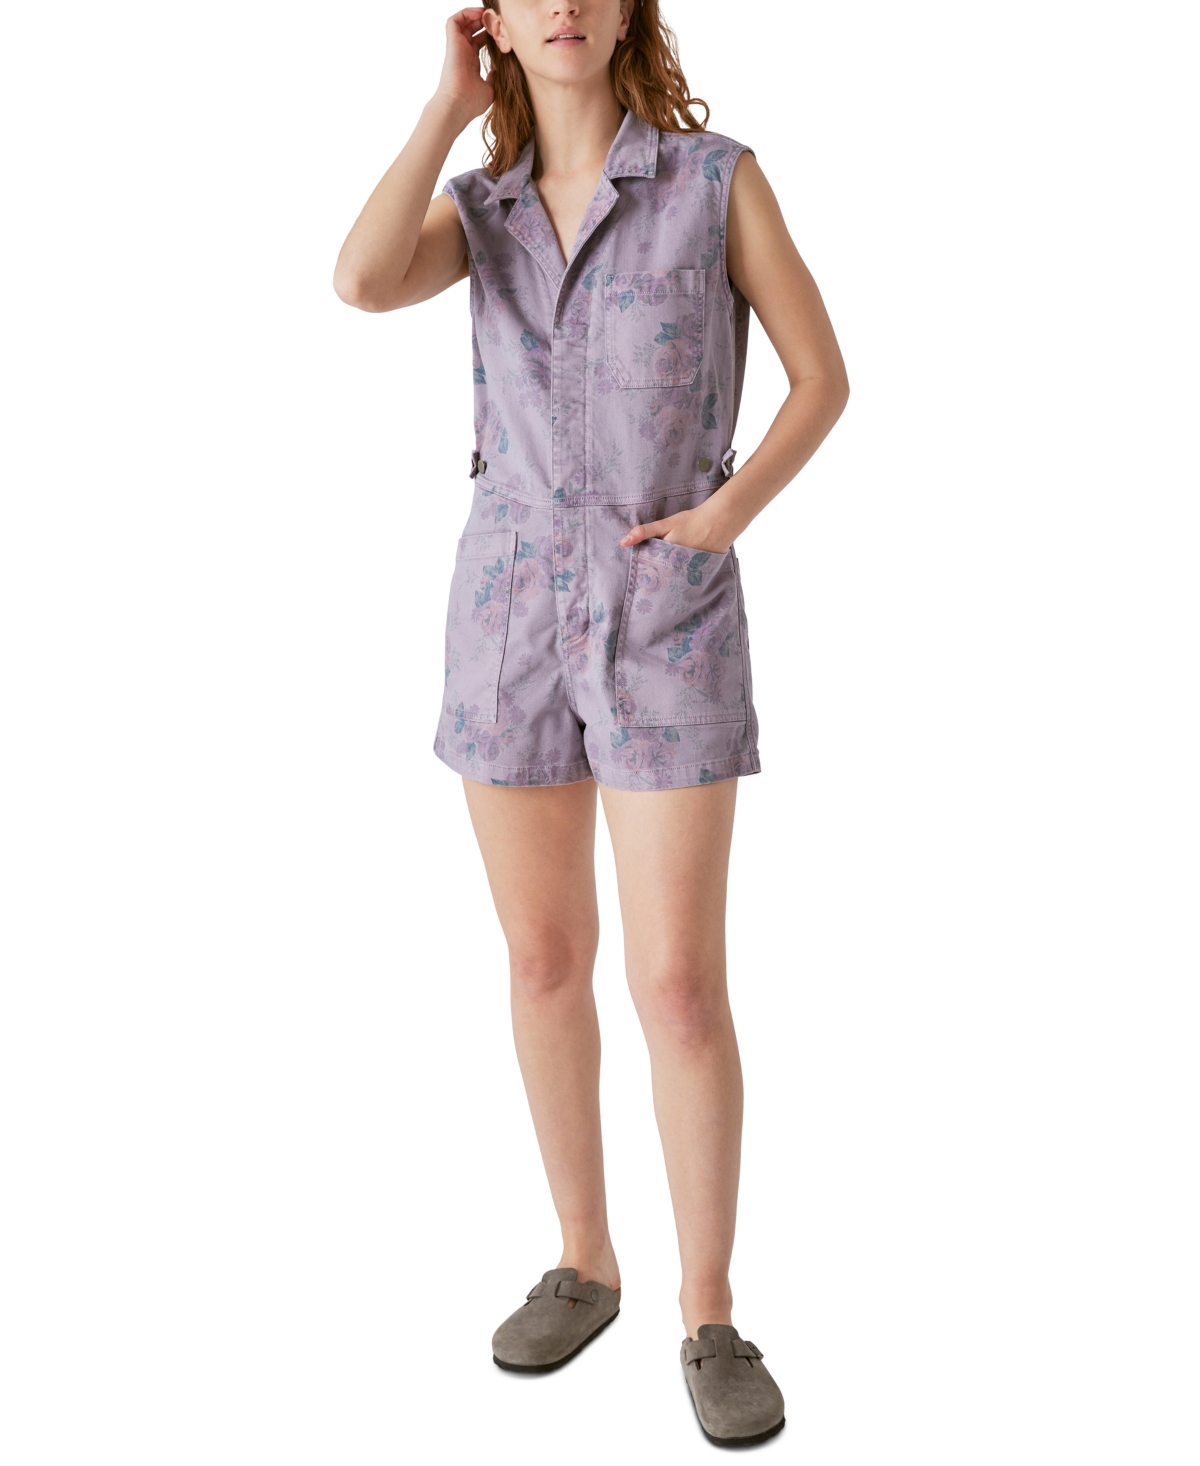 Lucky Brand Laura Ashley x Lucky Brand Women's Cotton Printed Coverall Shorts